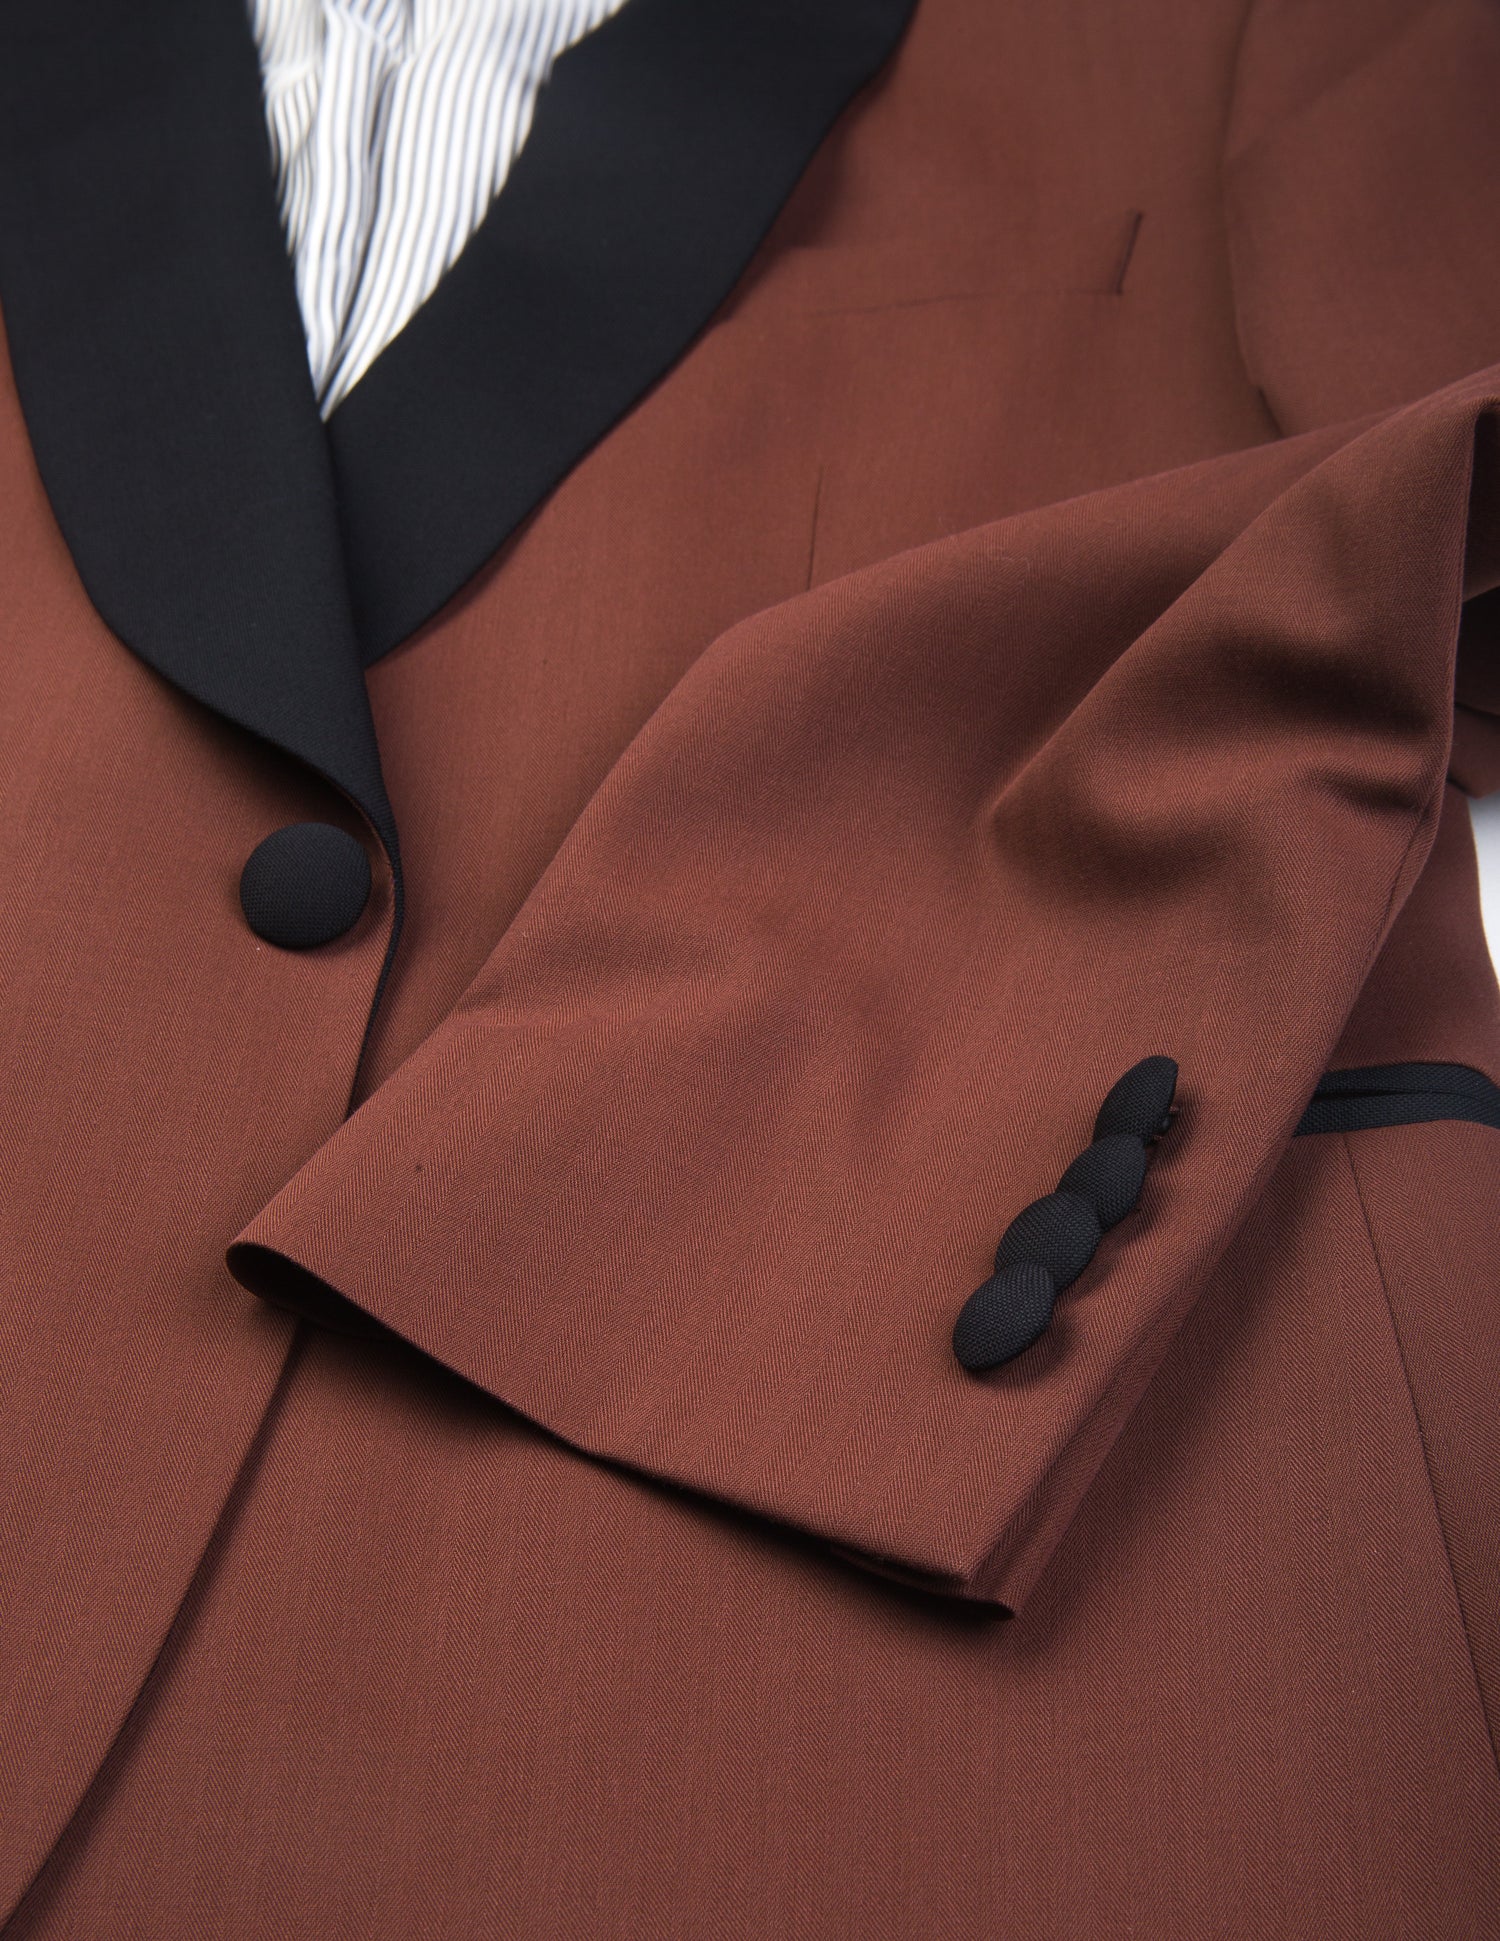 Detail shot of Brooklyn Tailors BKT50 Shawl Collar Dinner Jacket in Herringbone Wool/Cotton - Brick showing lapel, sleeve and button closure